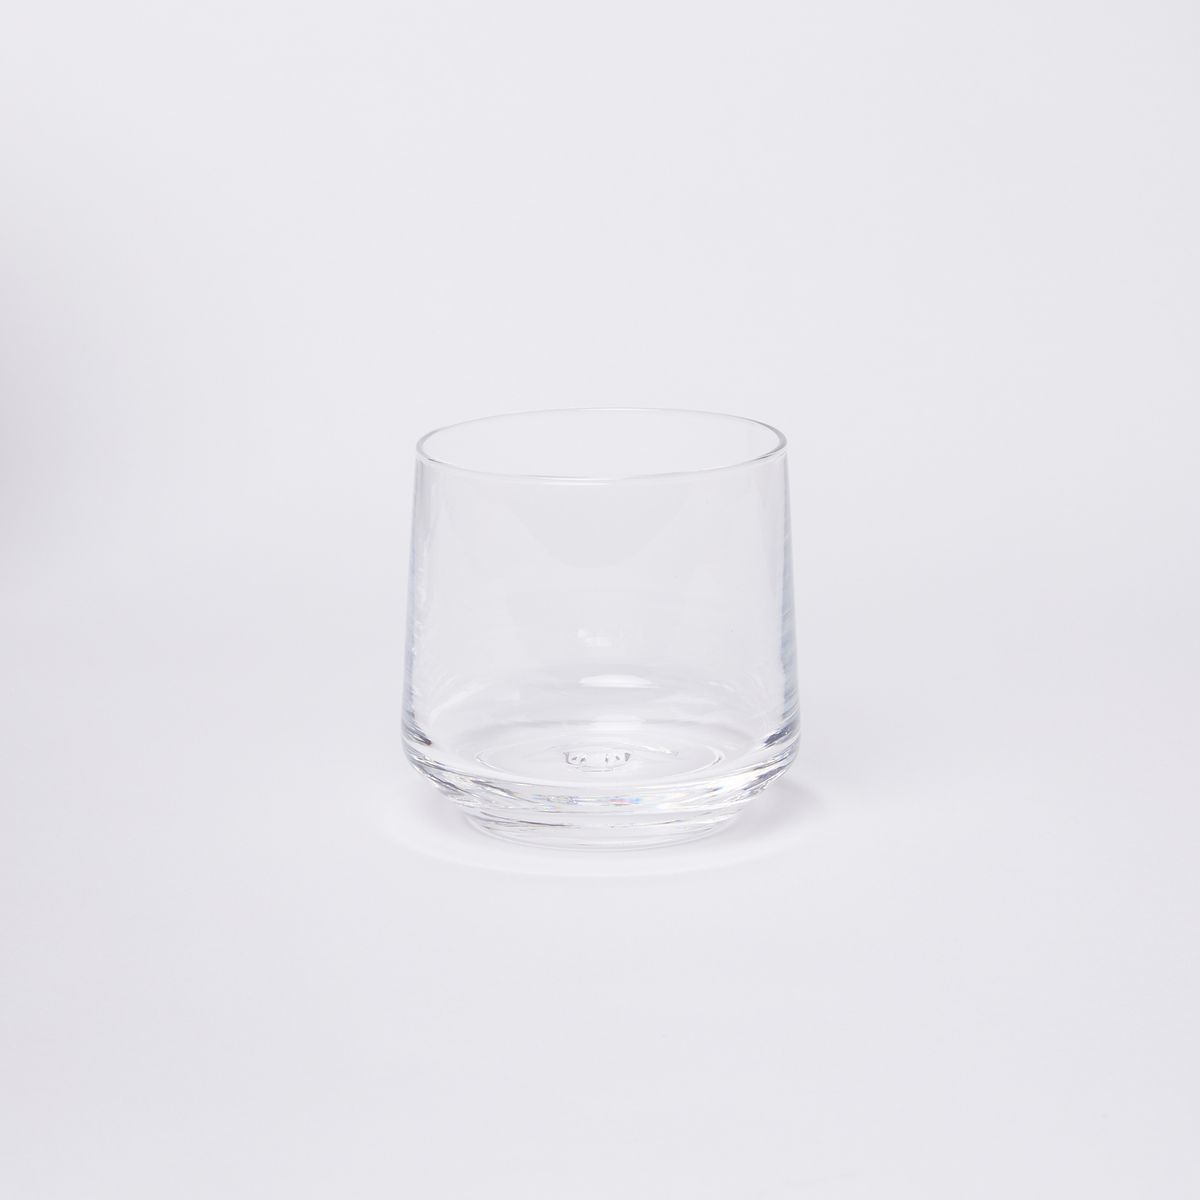 A clear glass tumbler that tapers towards the rim